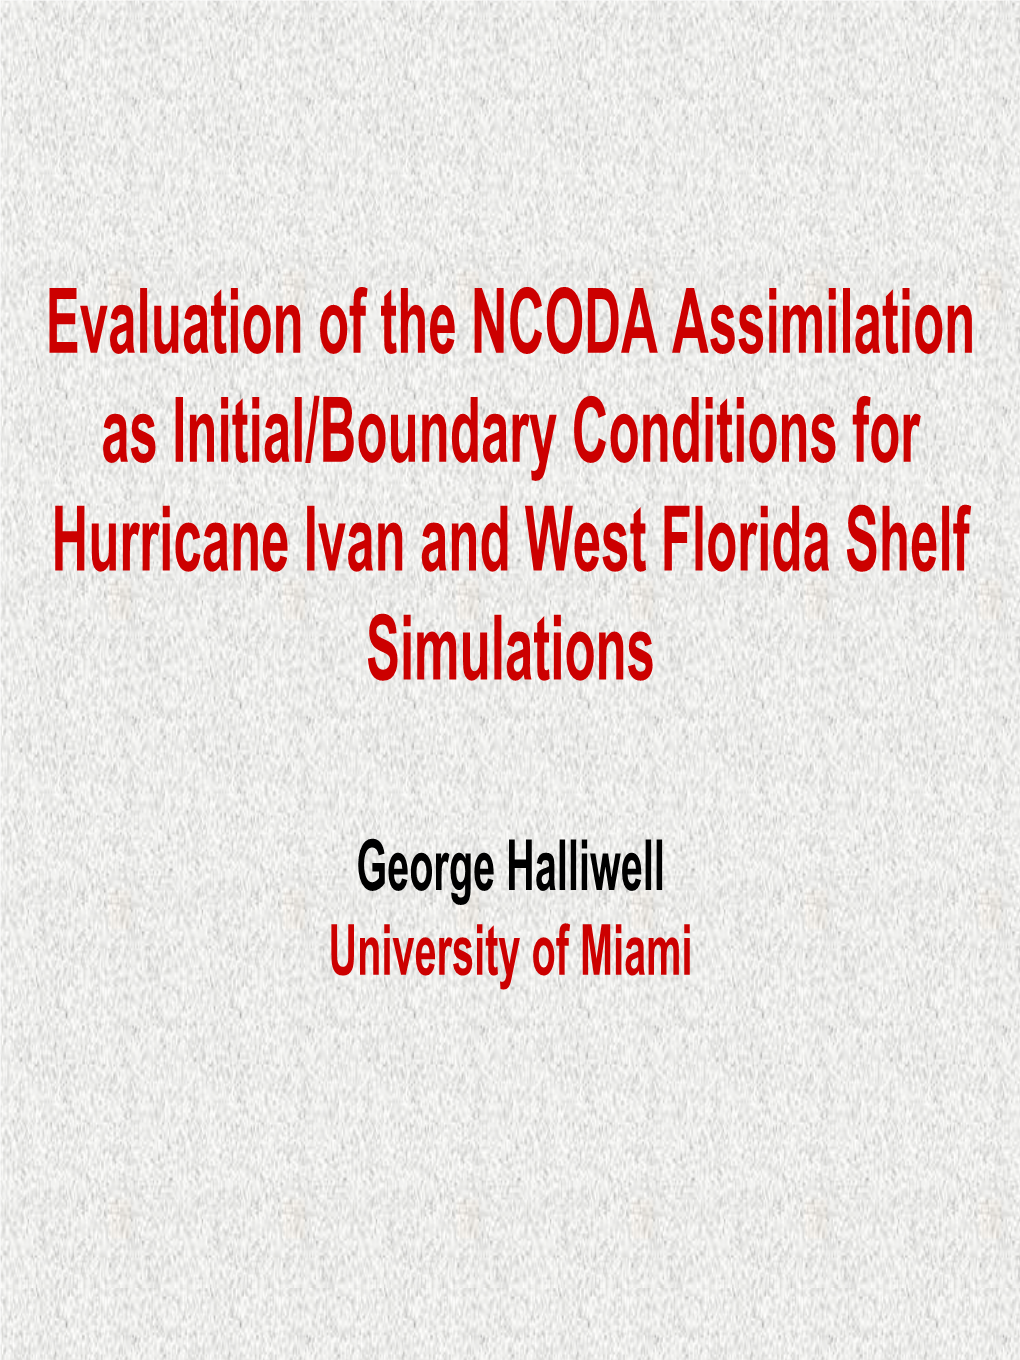 Eval of the NCODA Assimilation As Initial/Boundary Conditions For